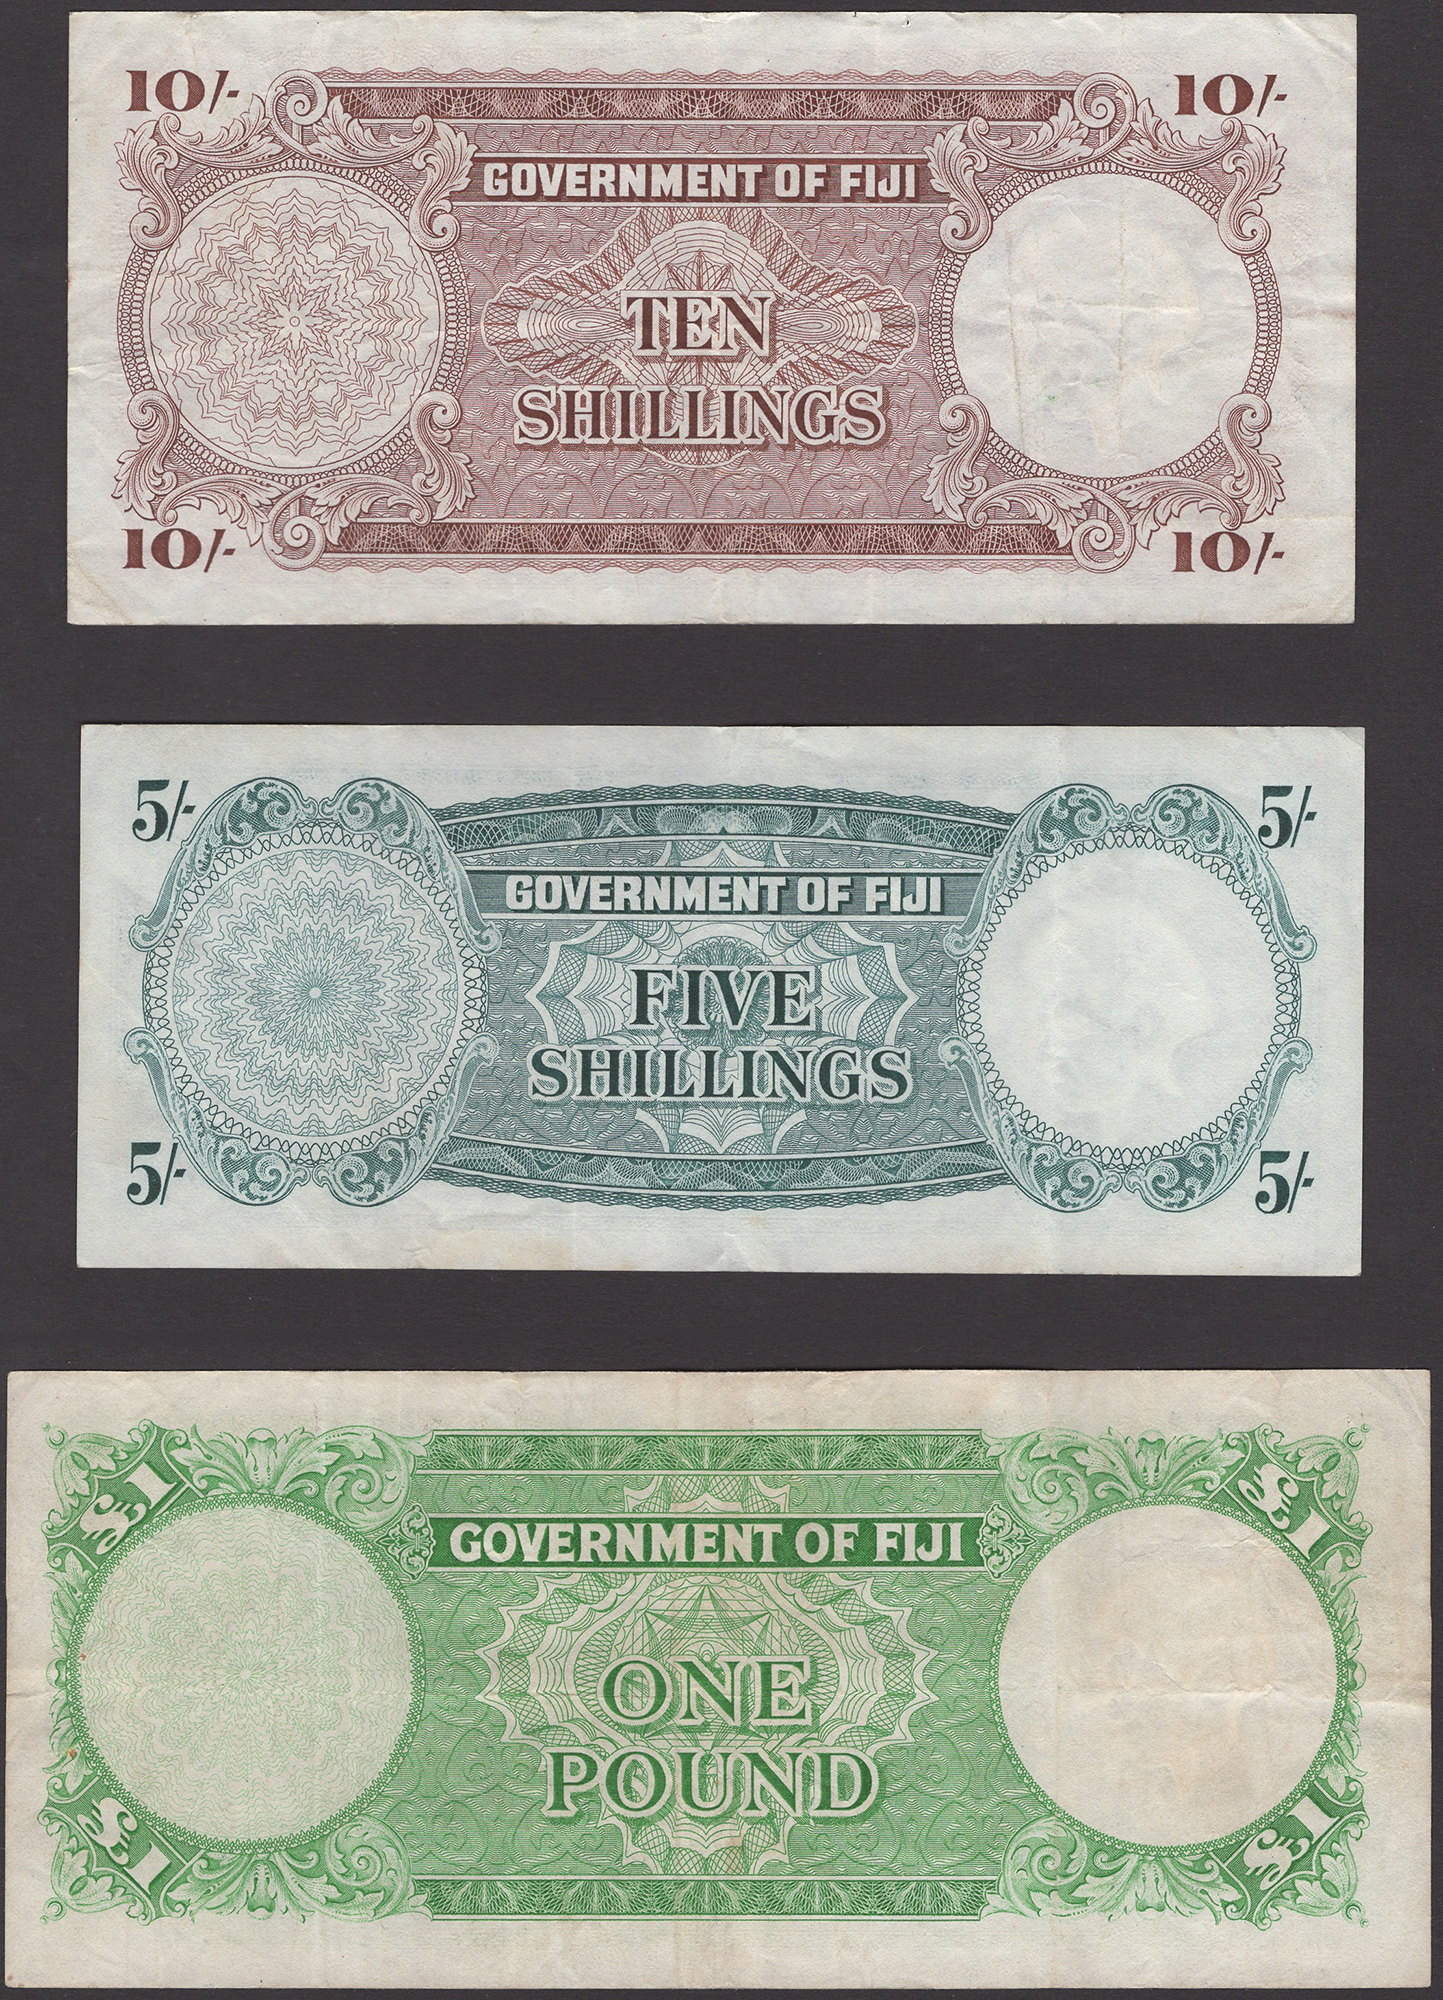 Government of Fiji, 5 and 10 Shillings, 1 October 1965, serial number C/14 36556 and C/9... - Bild 2 aus 2